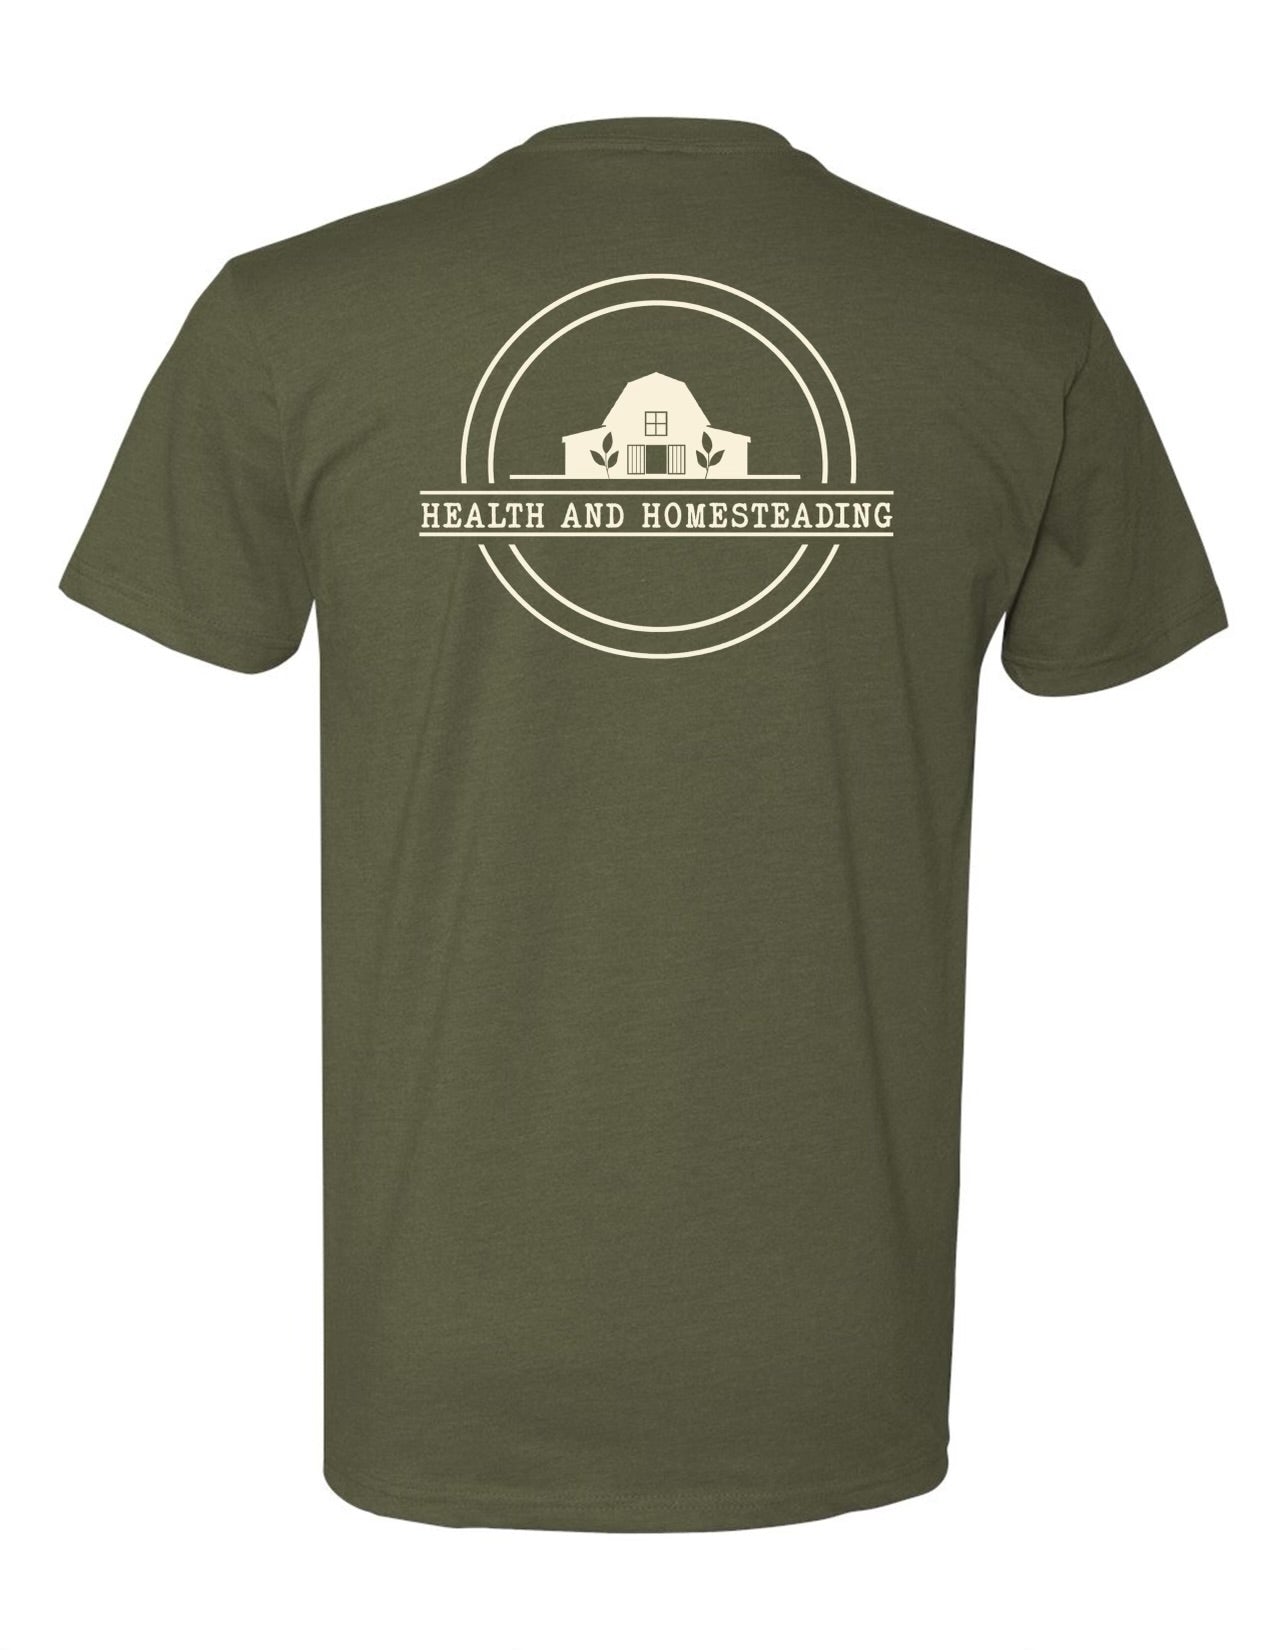 Health and Homesteading T-Shirt